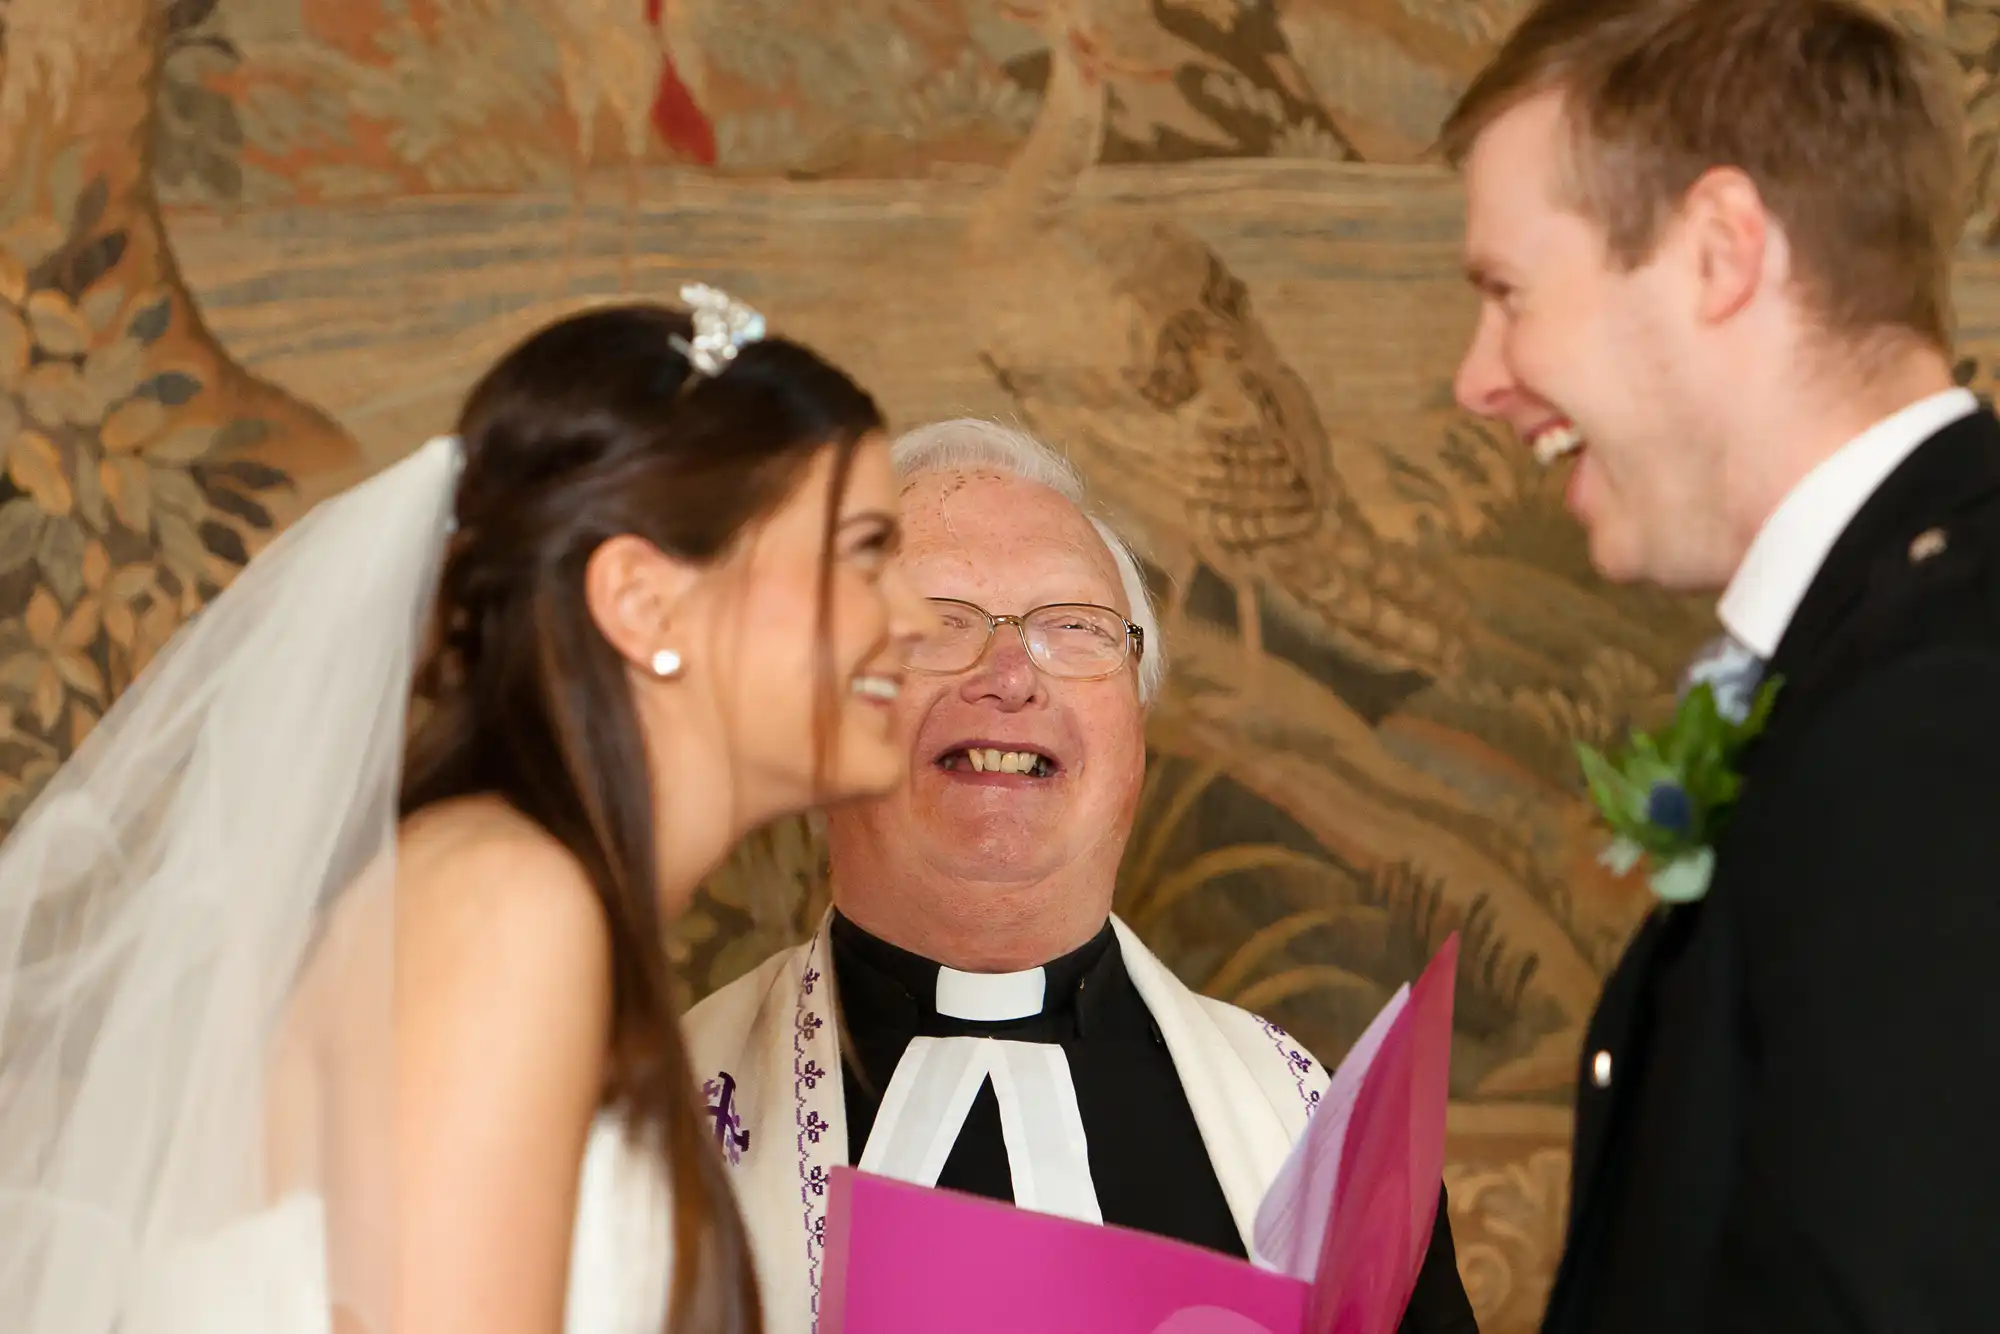 A bride and groom smiling at each other, with a joyful priest holding a pink booklet, during a wedding ceremony.